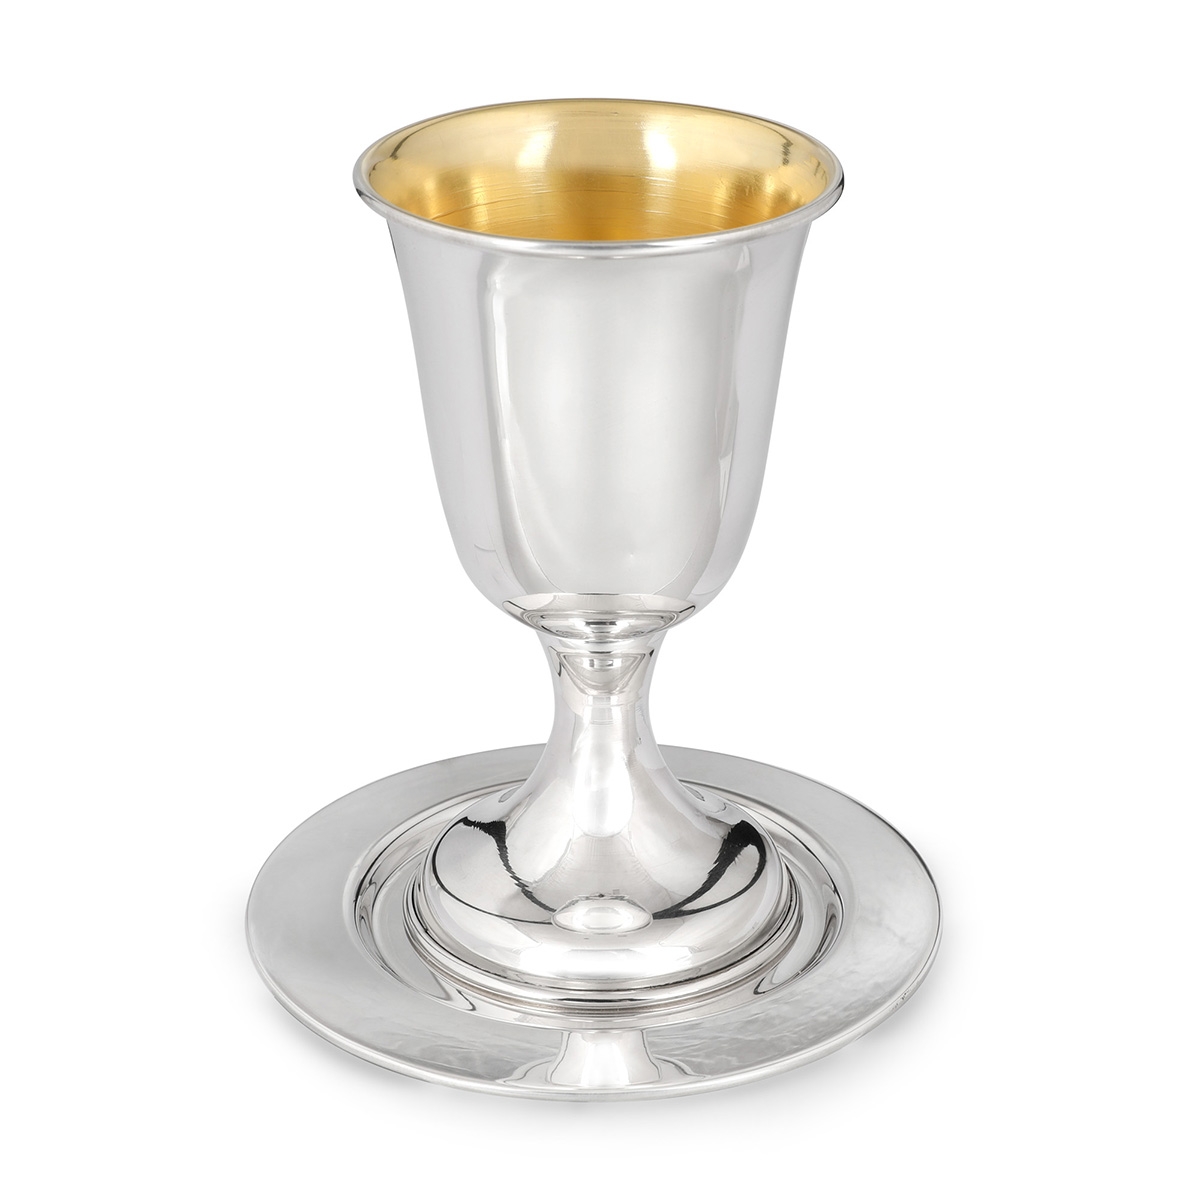 Bier Judaica Elegant Handcrafted Sterling Silver Kiddush Cup With Polished Finish - 1